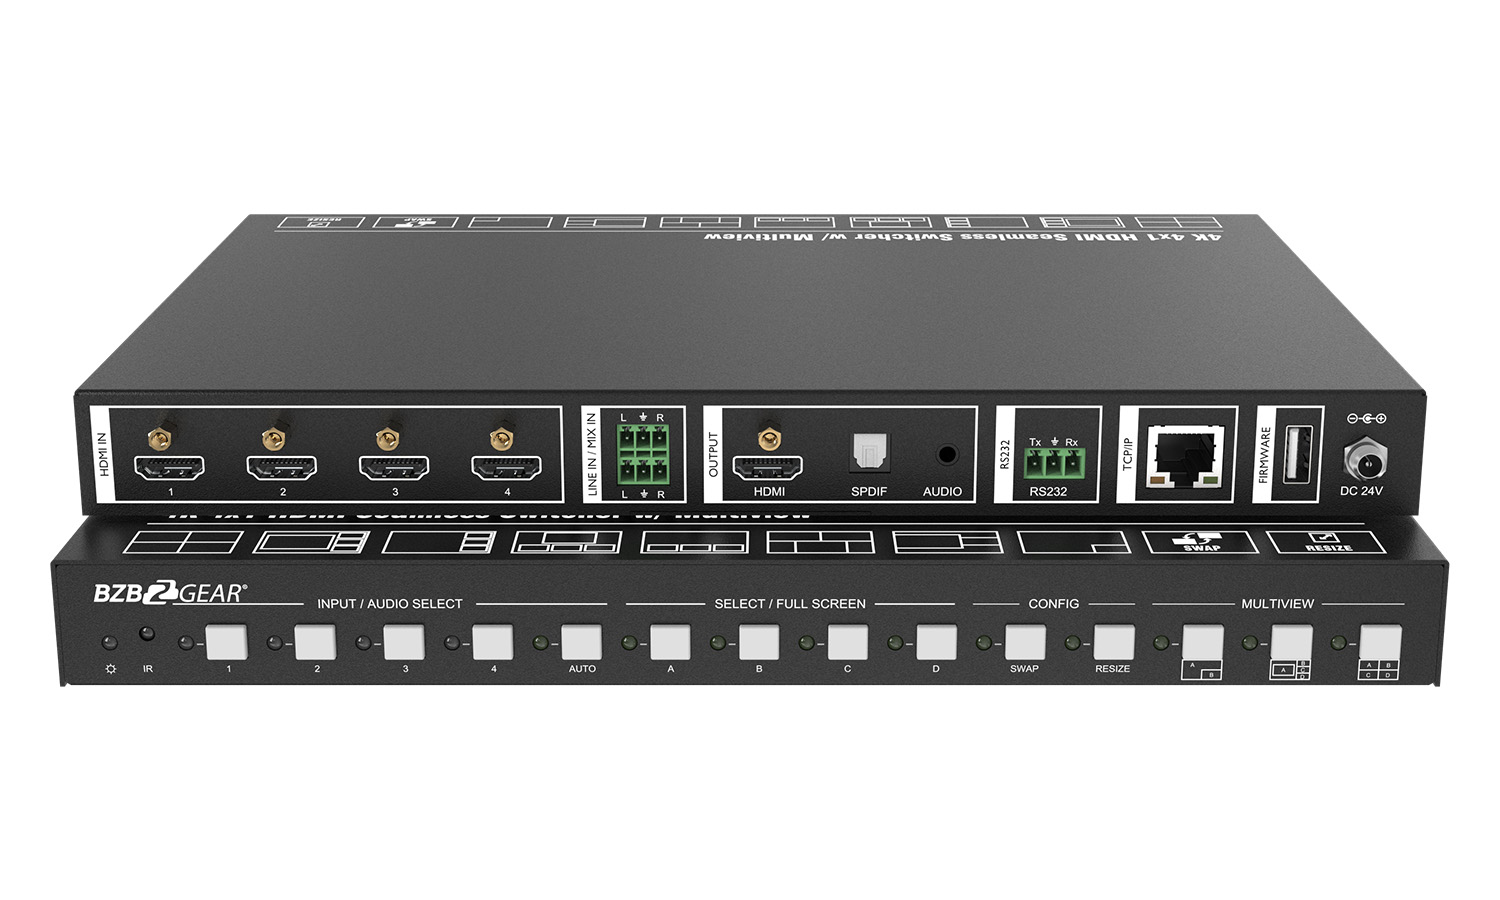 BZBGEAR BG-UMV-HA41 4X1 4K UHD HDMI Seamless Multiviewer/Switcher/Scaler with Audio and RS-232 Support